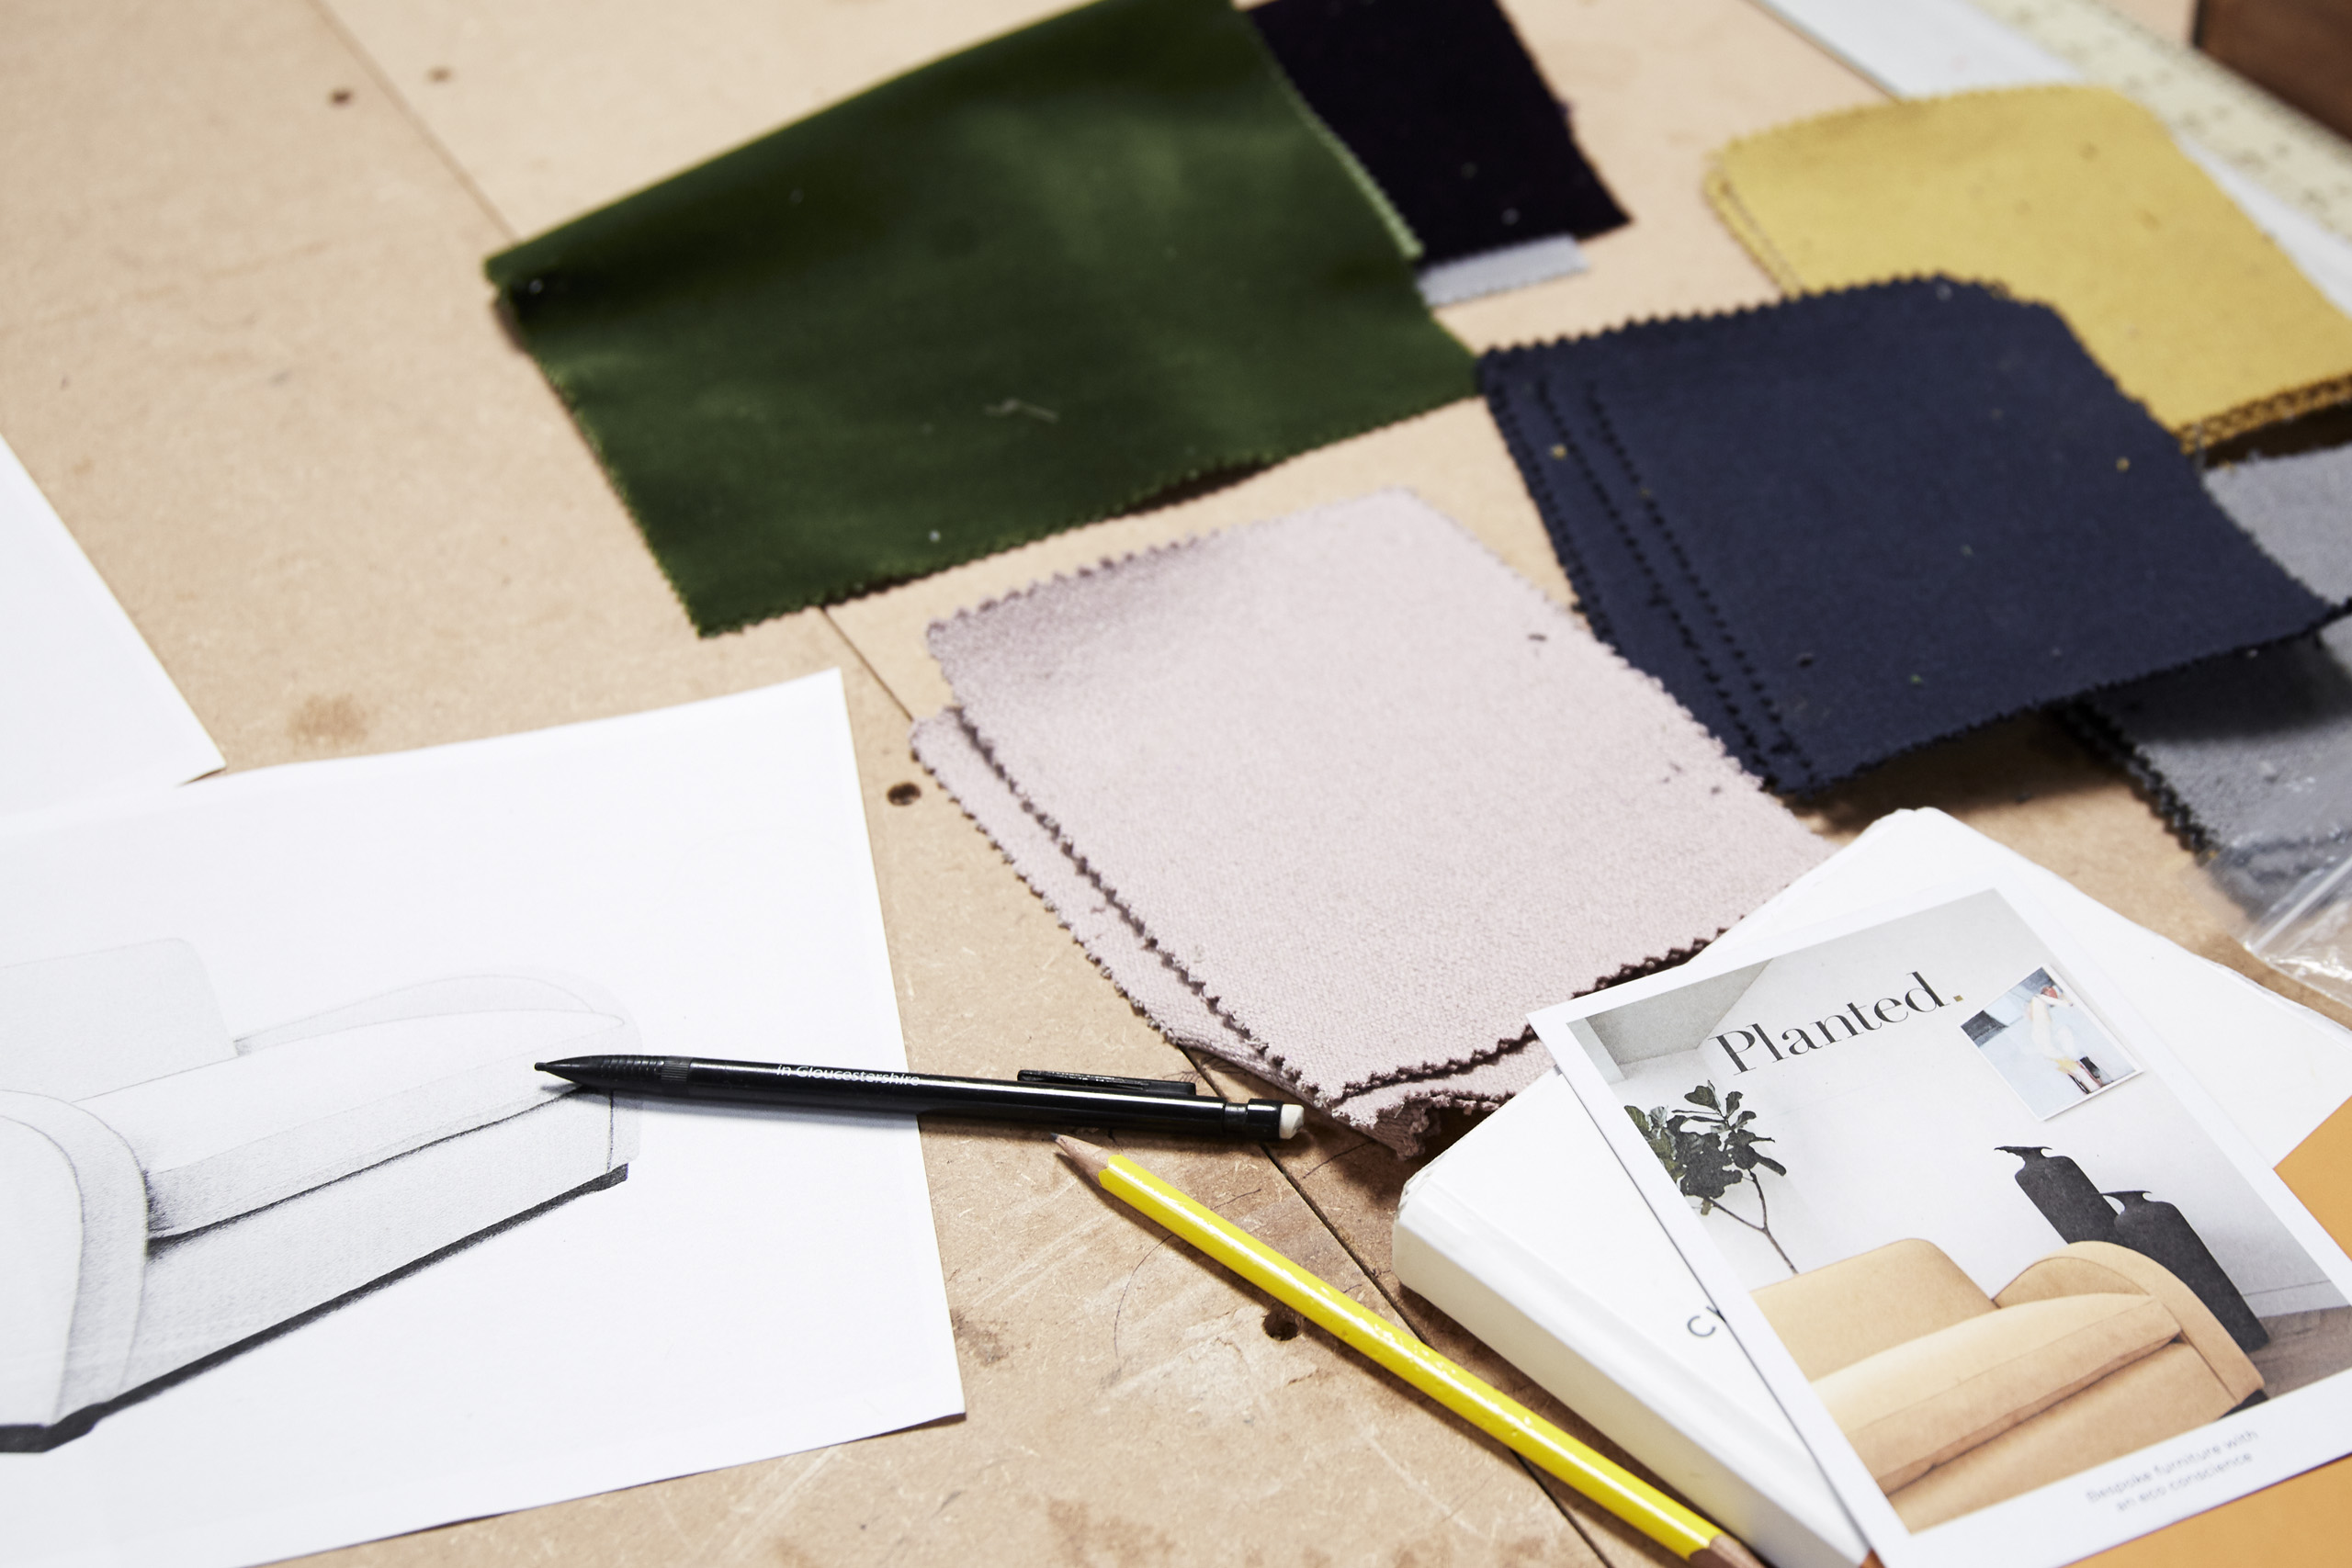 Sustainably sourced materials. Free fabric samples